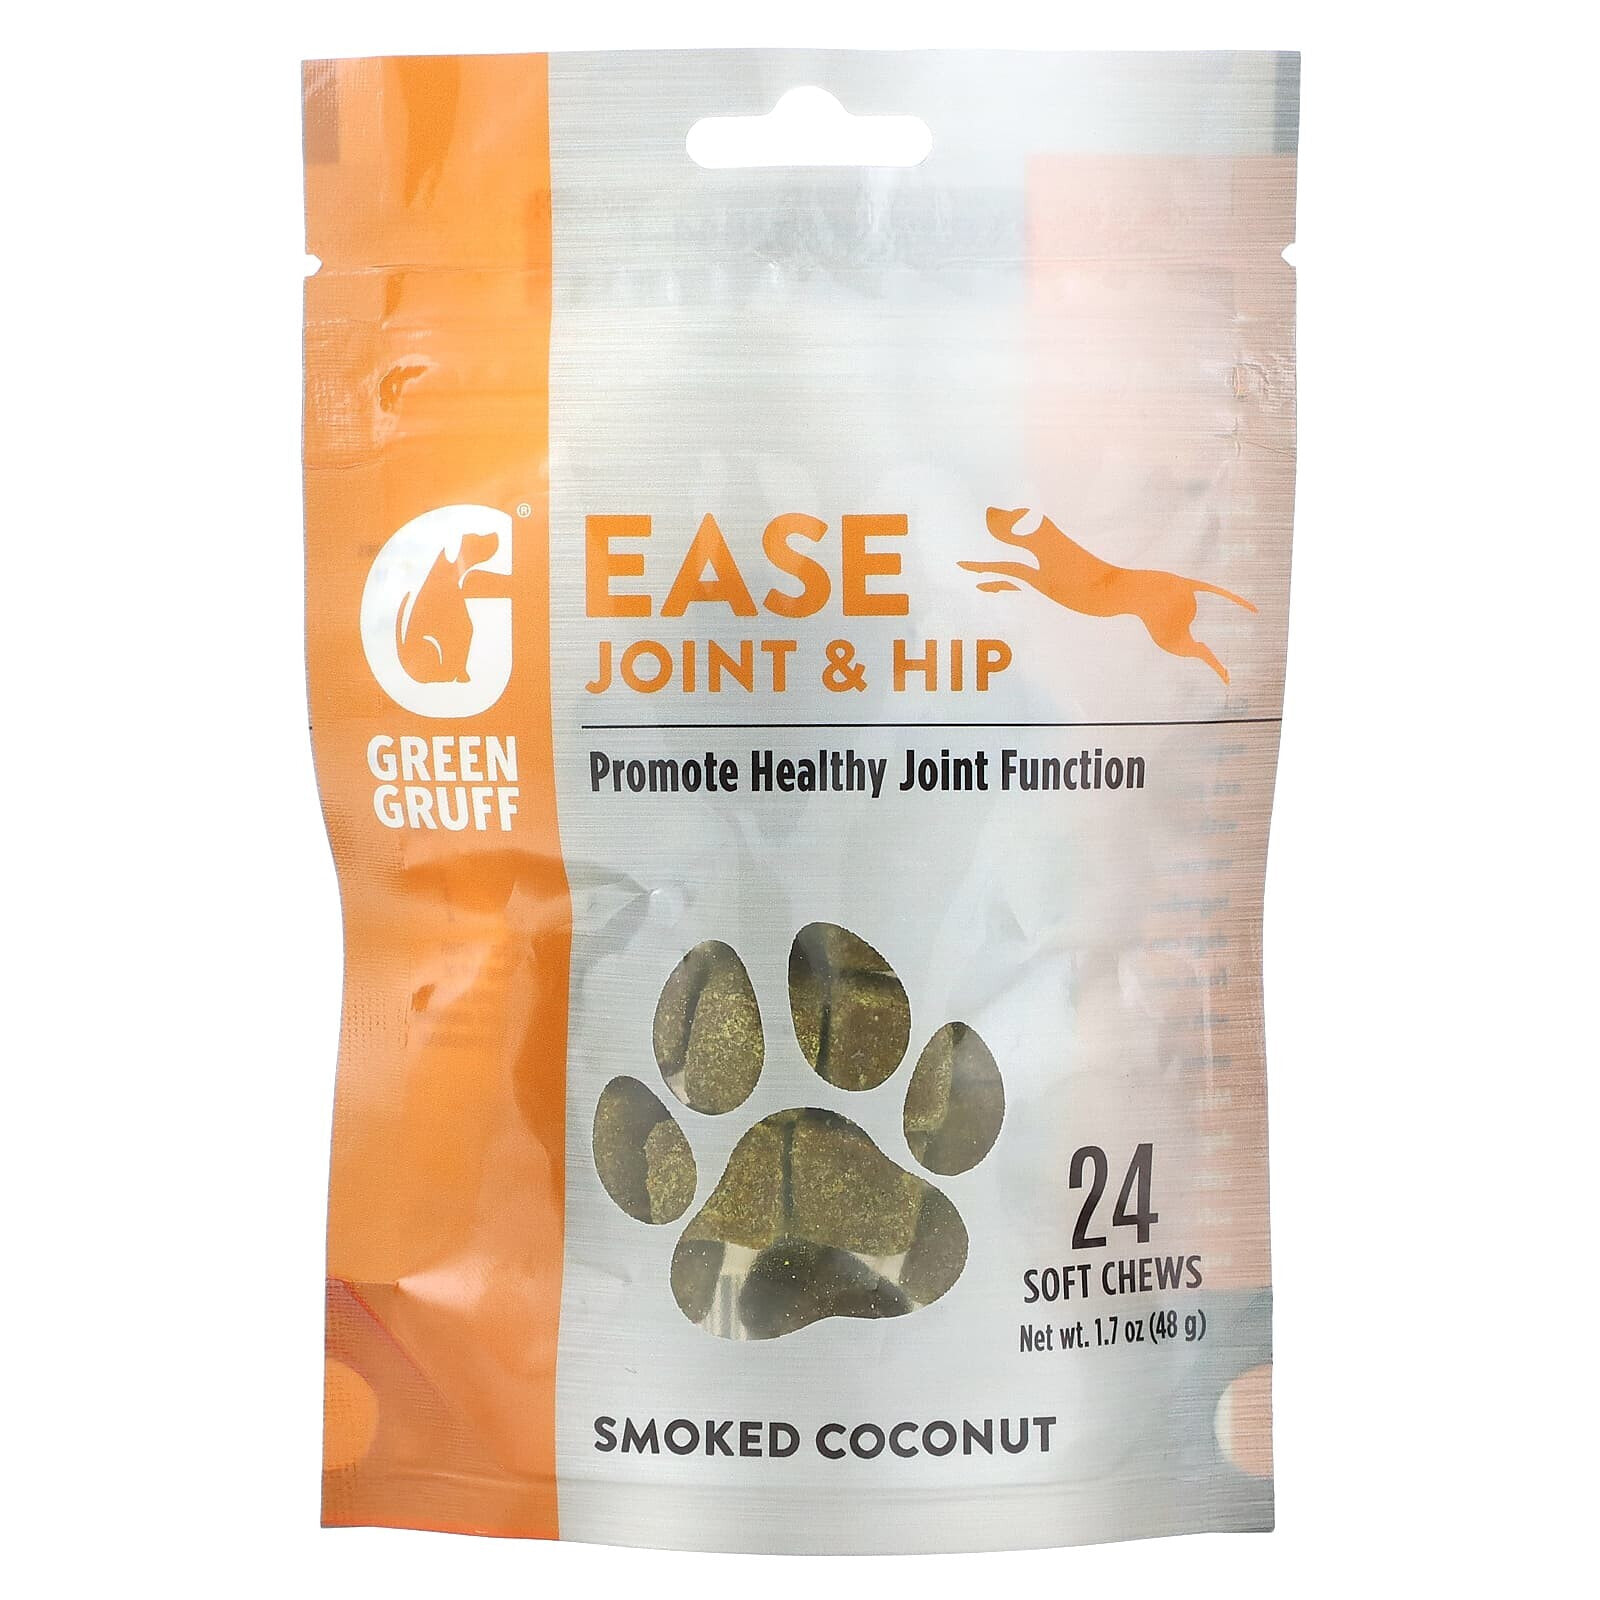 Green Gruff, Ease Joint & Hip, Smoked Coconut, 24 Soft Chews, 1.7 oz (48 g)